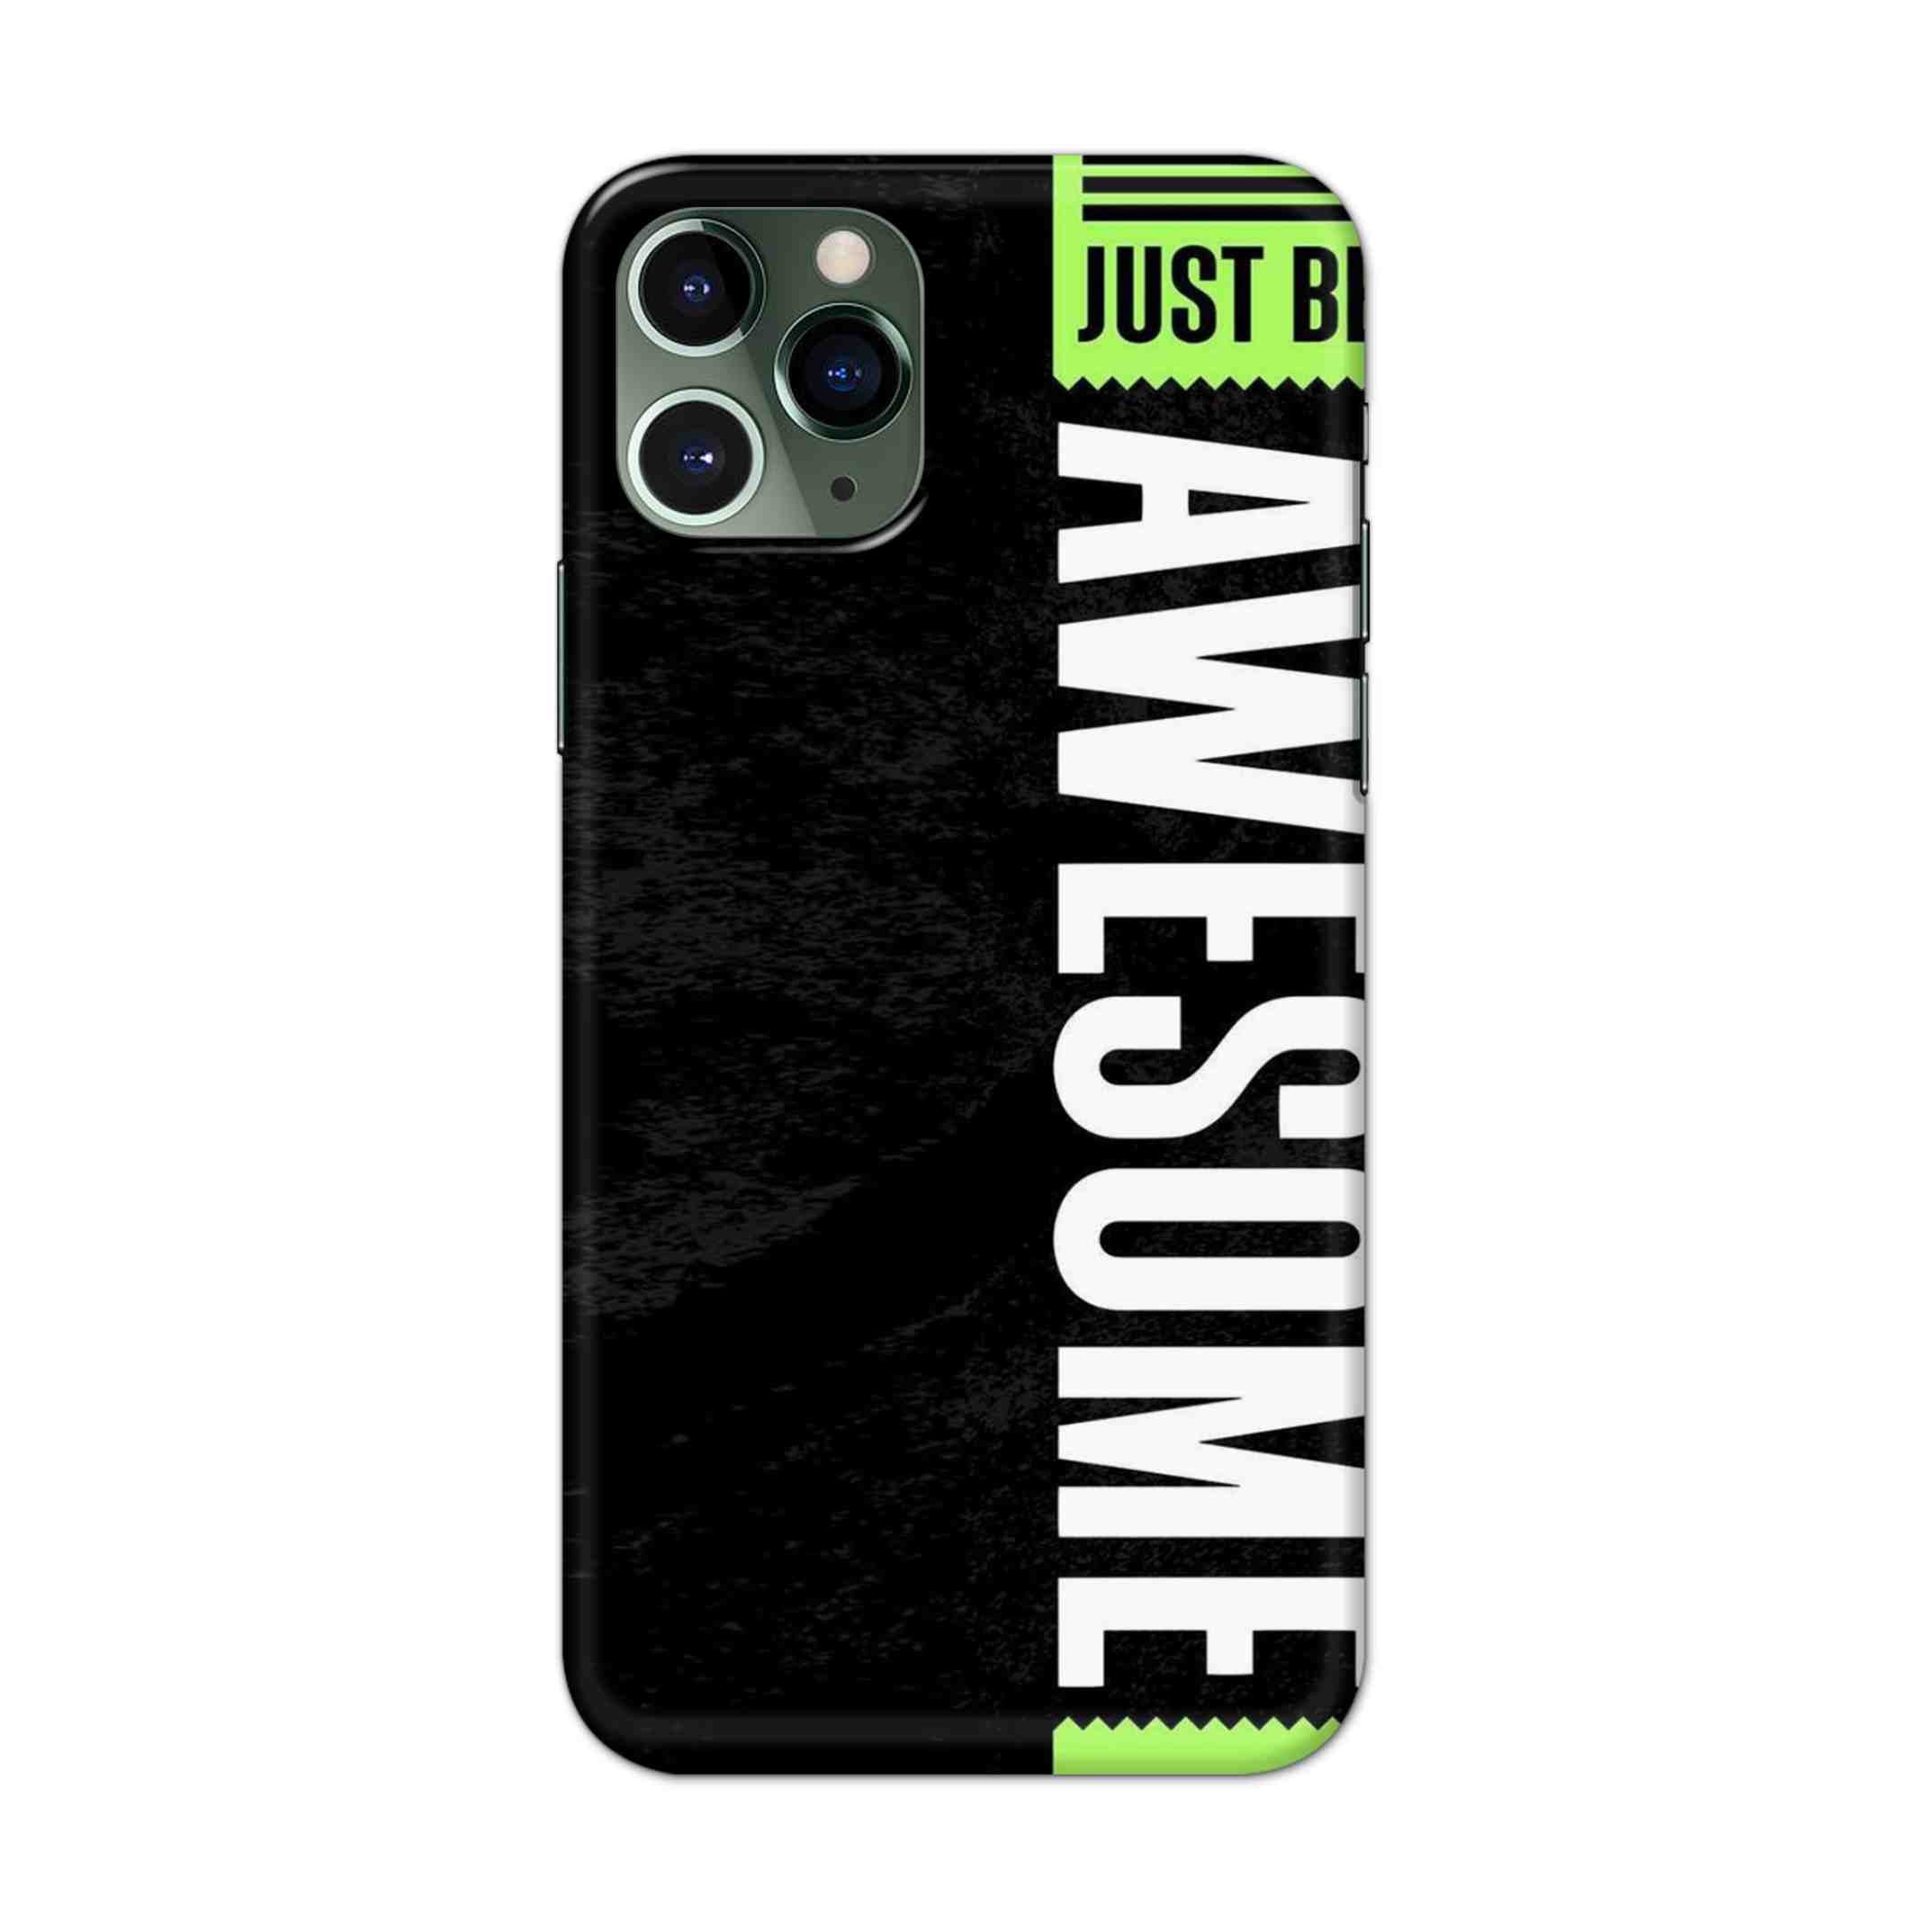 Buy Awesome Street Hard Back Mobile Phone Case/Cover For iPhone 11 Pro Online